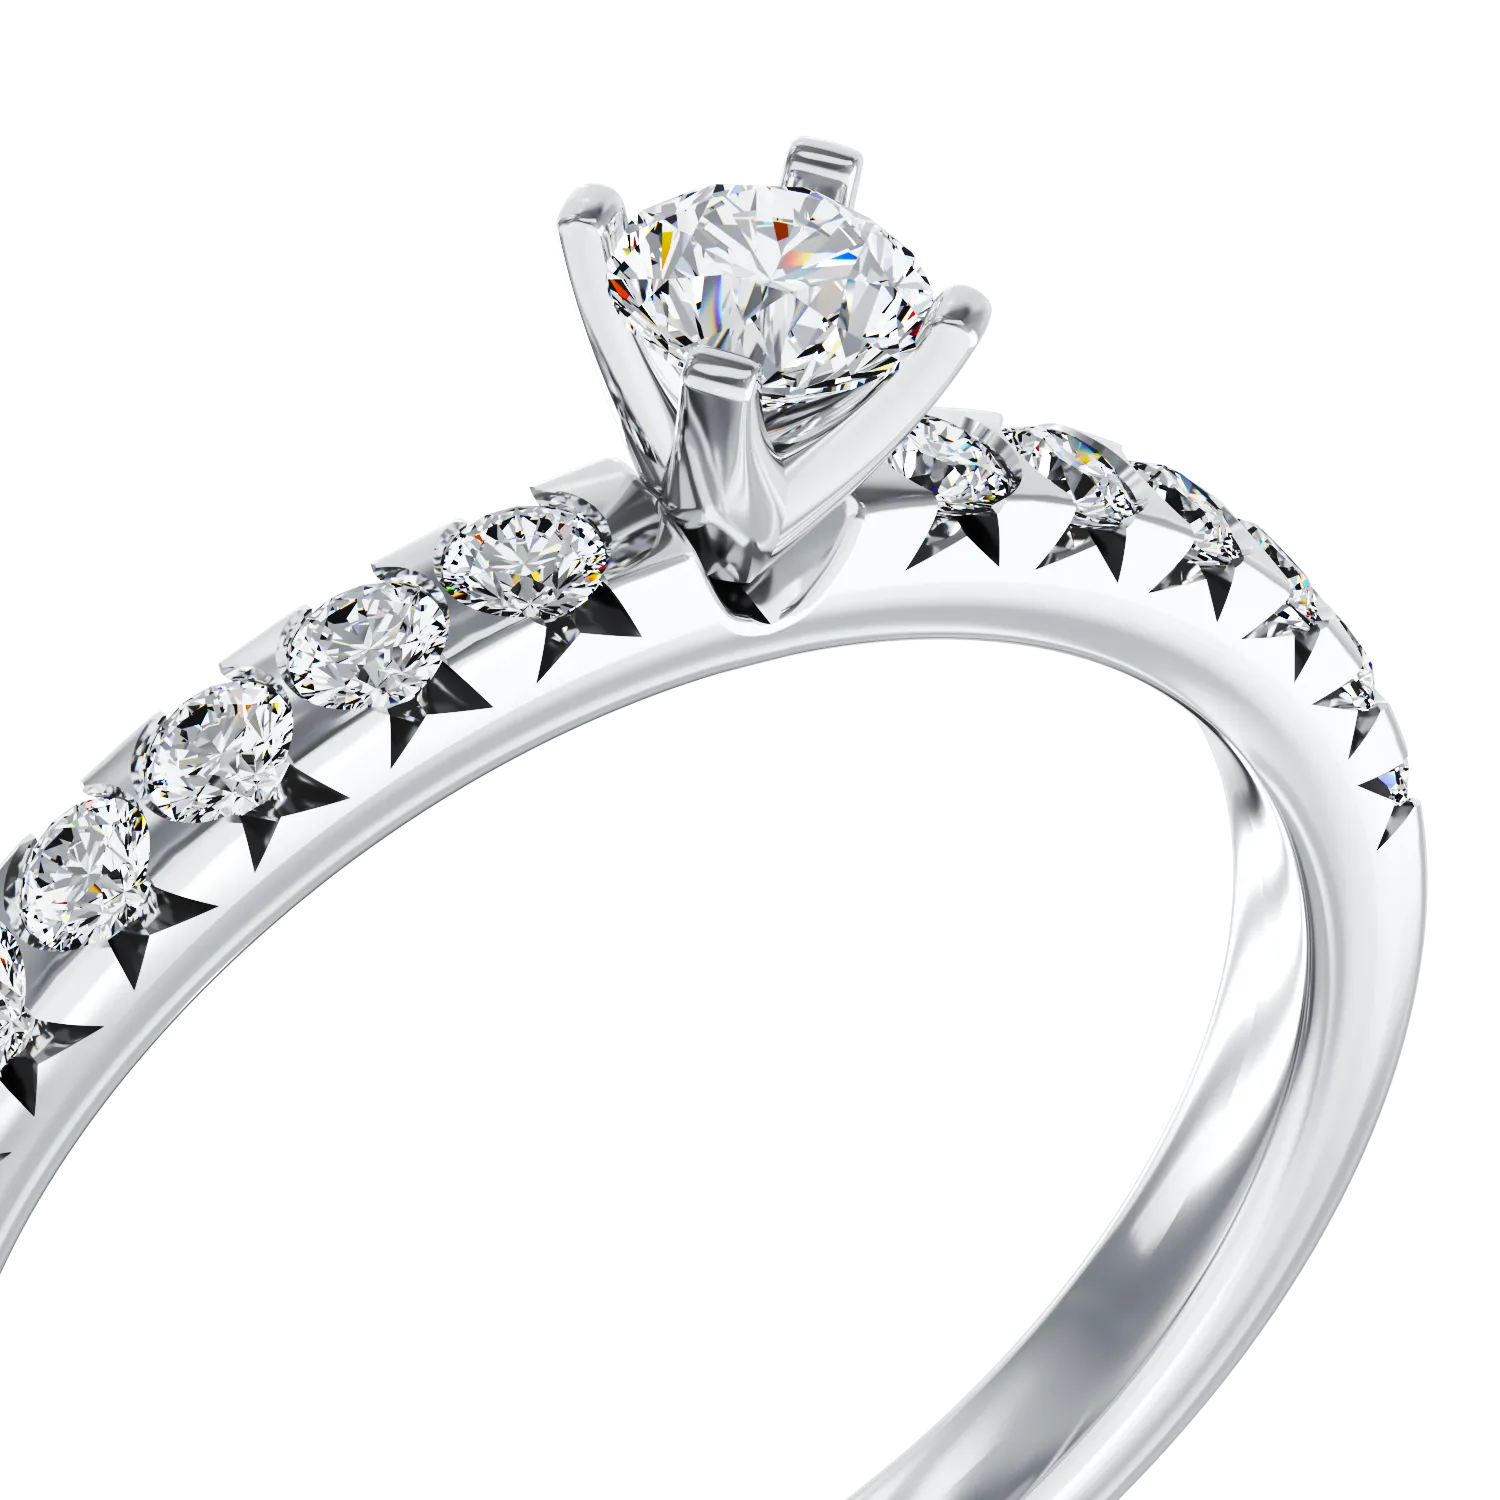 18K white gold engagement ring with 0.15ct diamond and 0.25ct diamonds